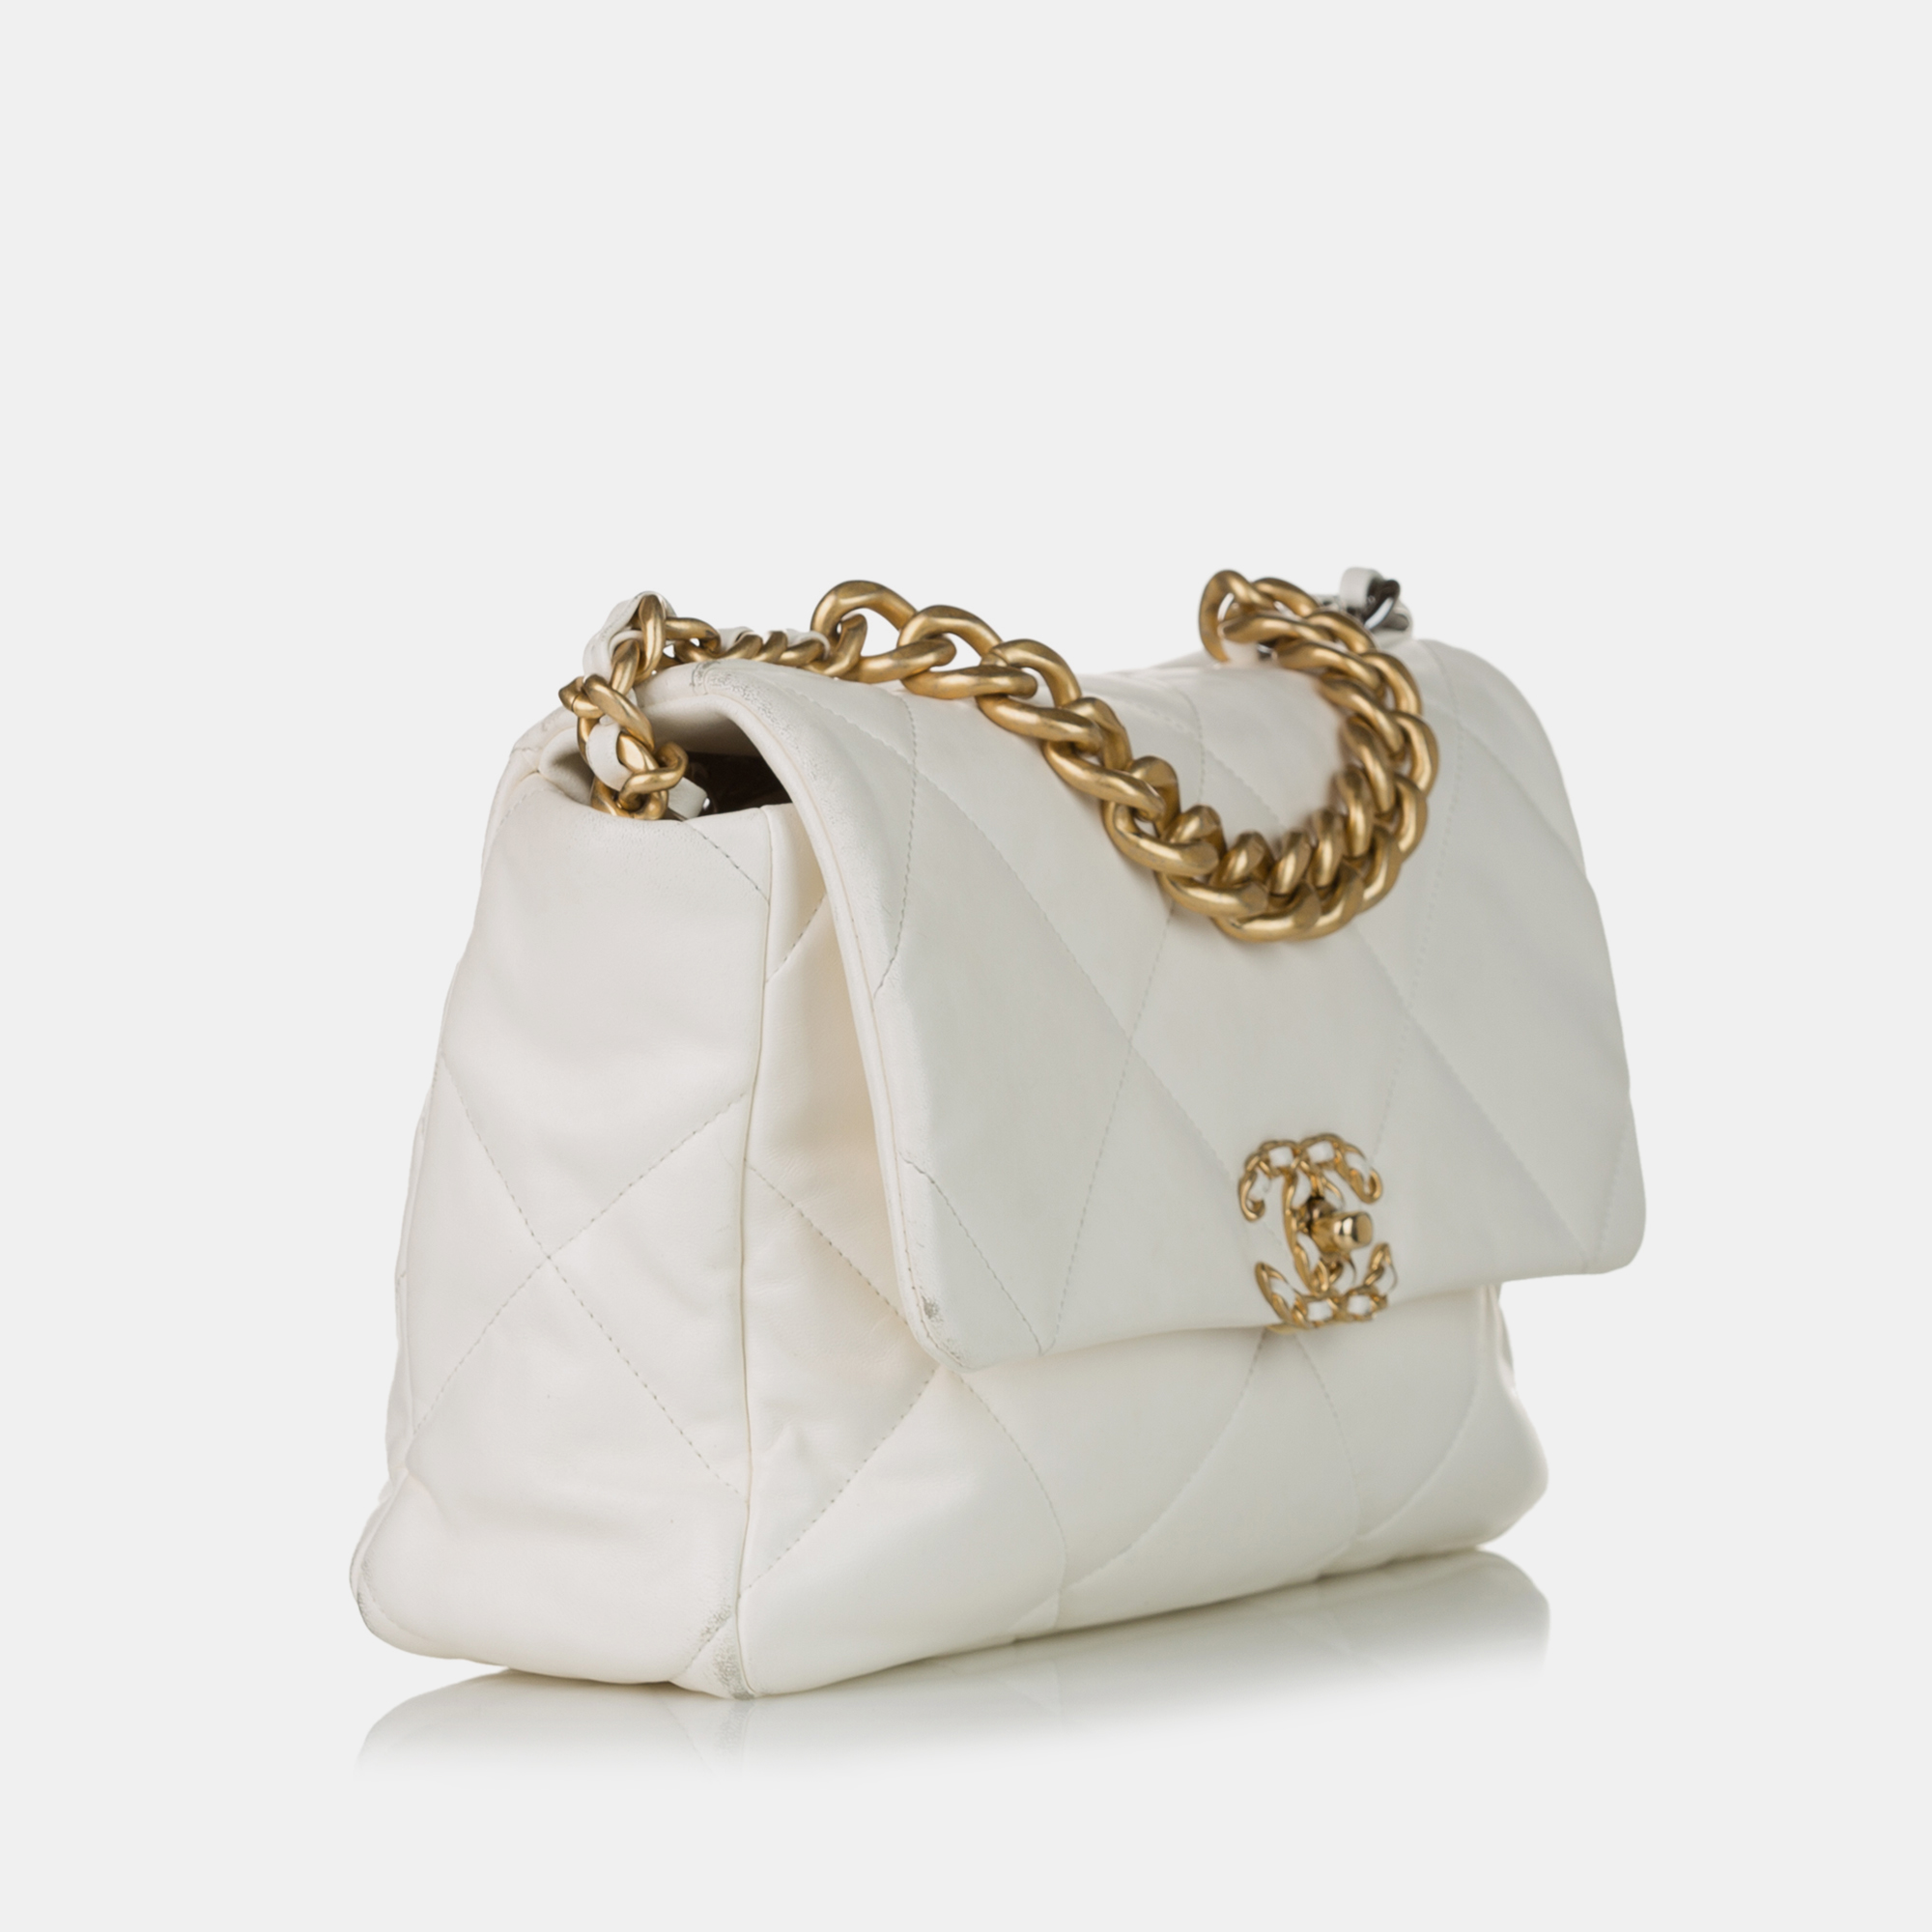 

Chanel 19 Lambskin Leather Flap Bag, White